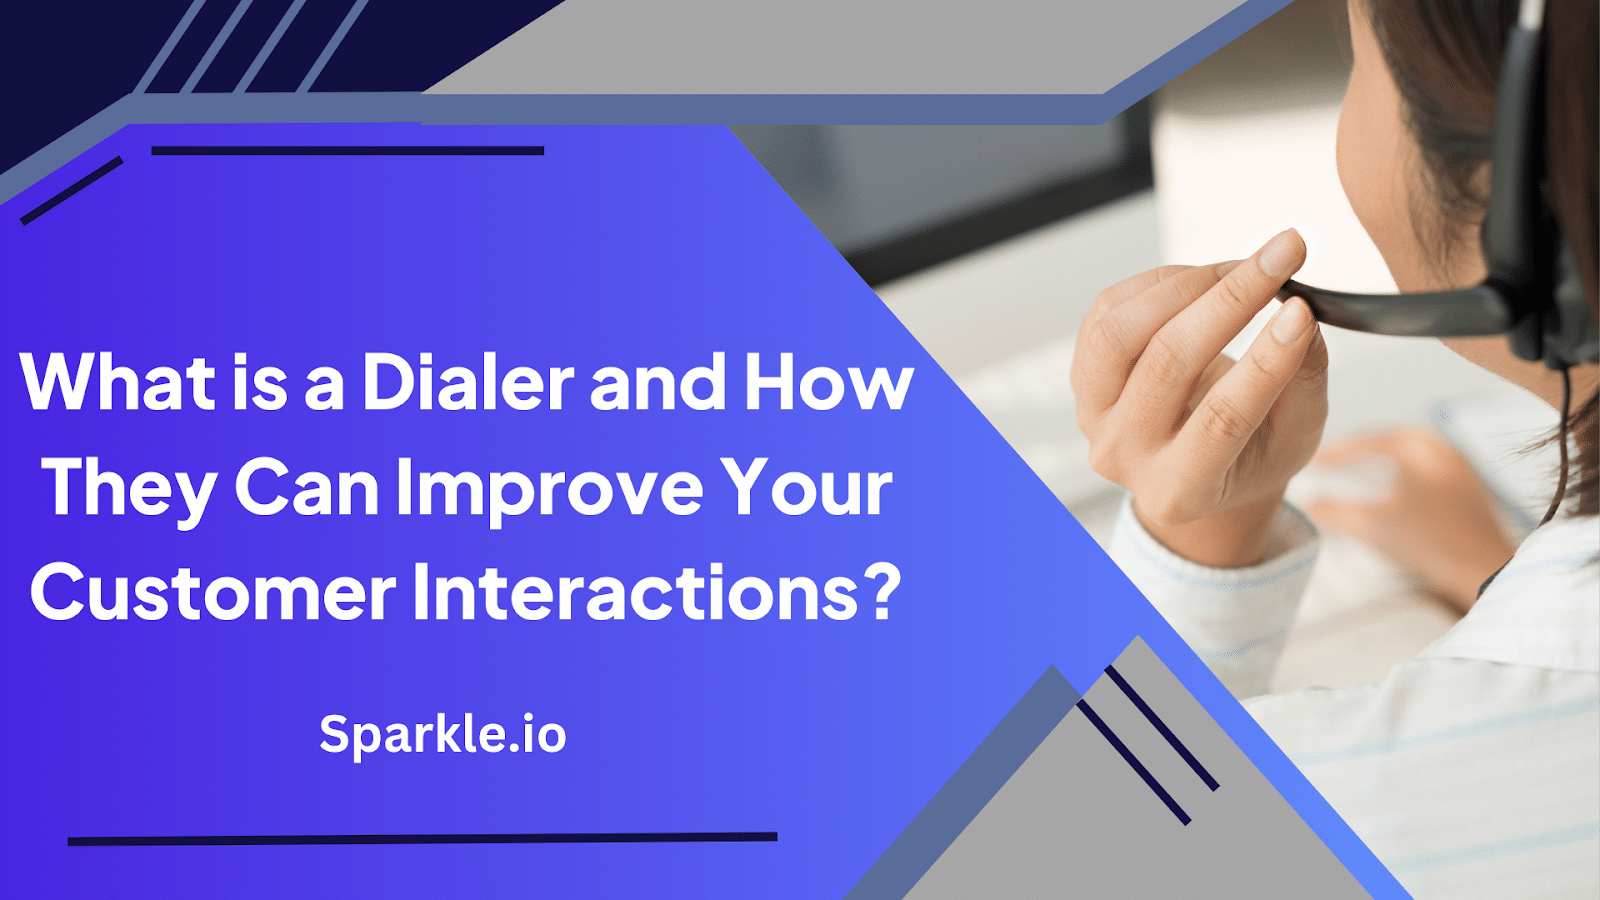 What is a Dialer and How They Can Improve Your Customer Interactions?